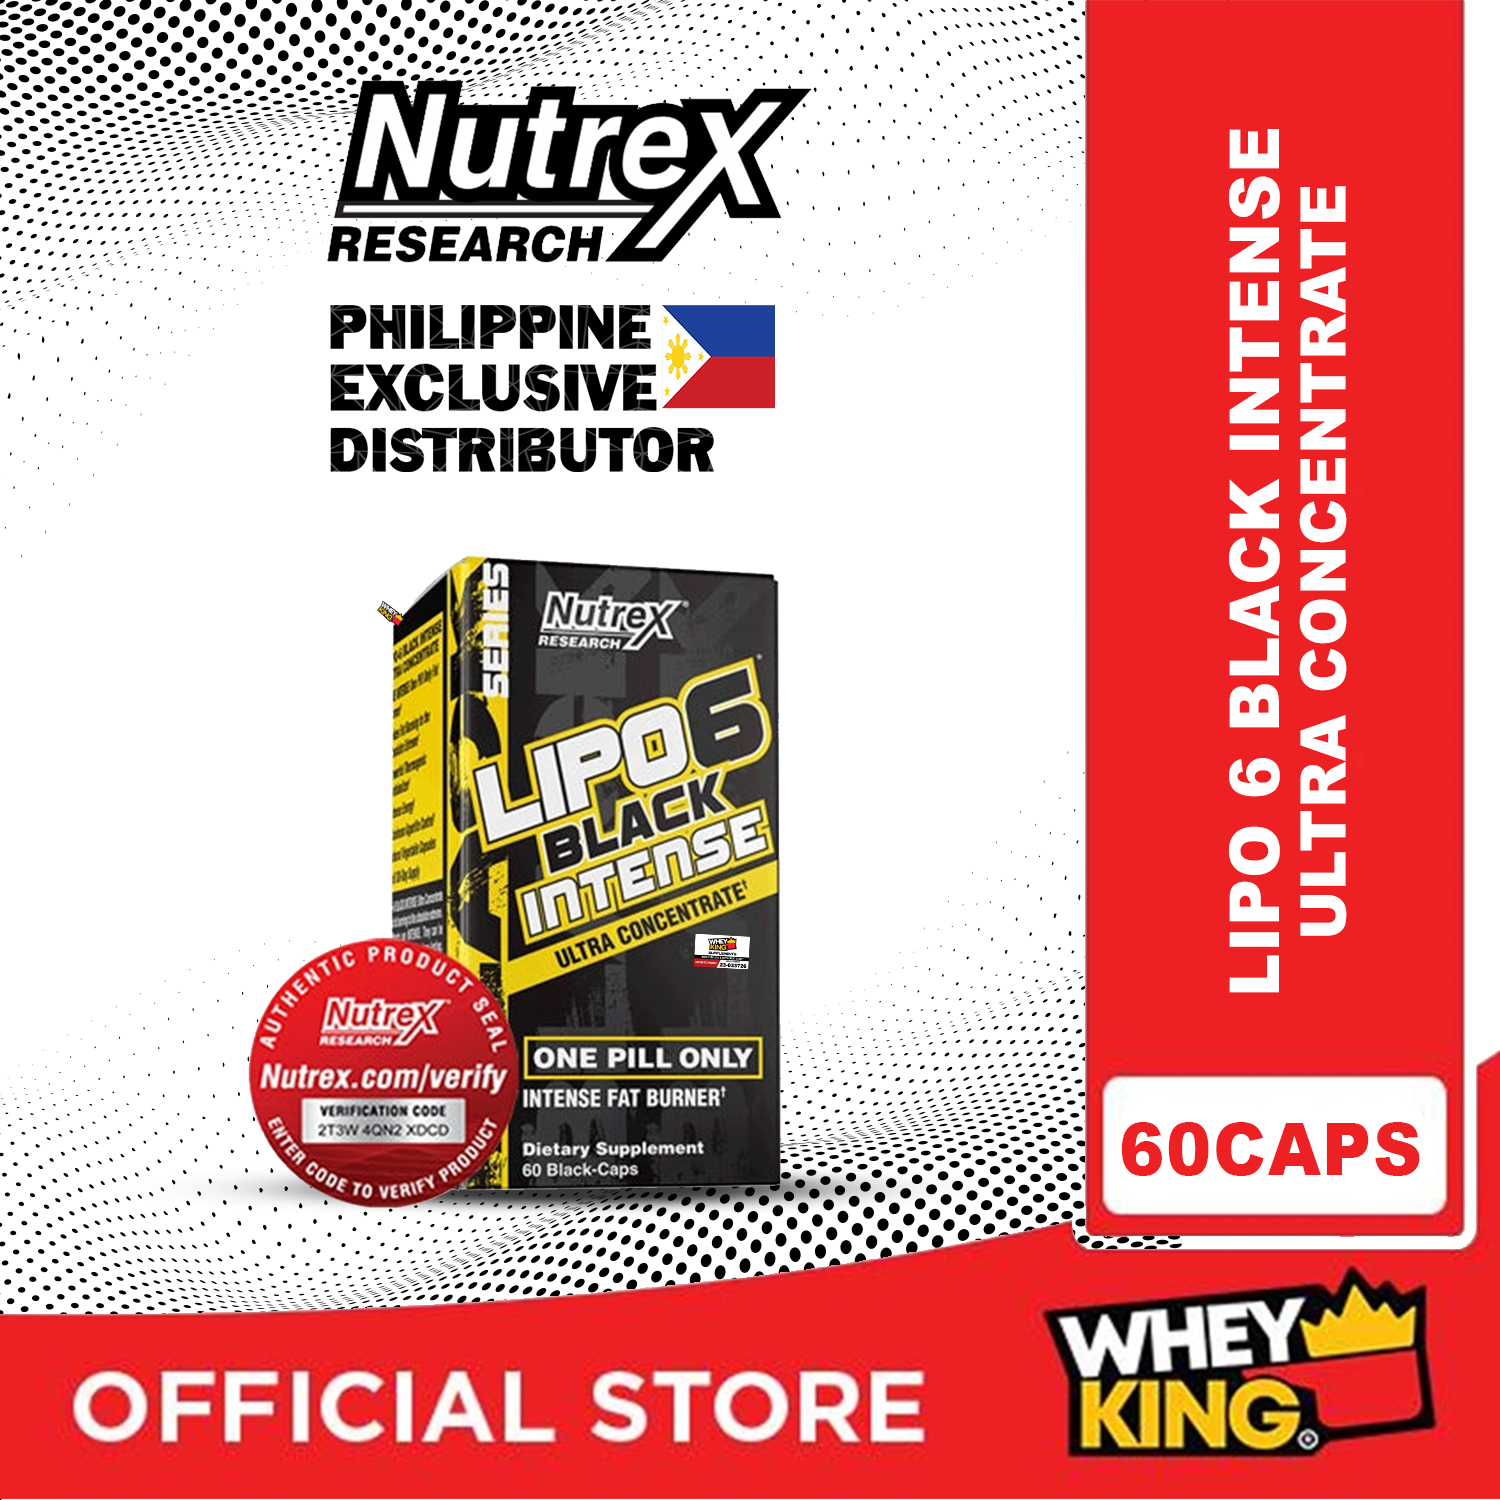 Nutrex Lipo 6 Intense Ultra Concentrate - 60 Capsules